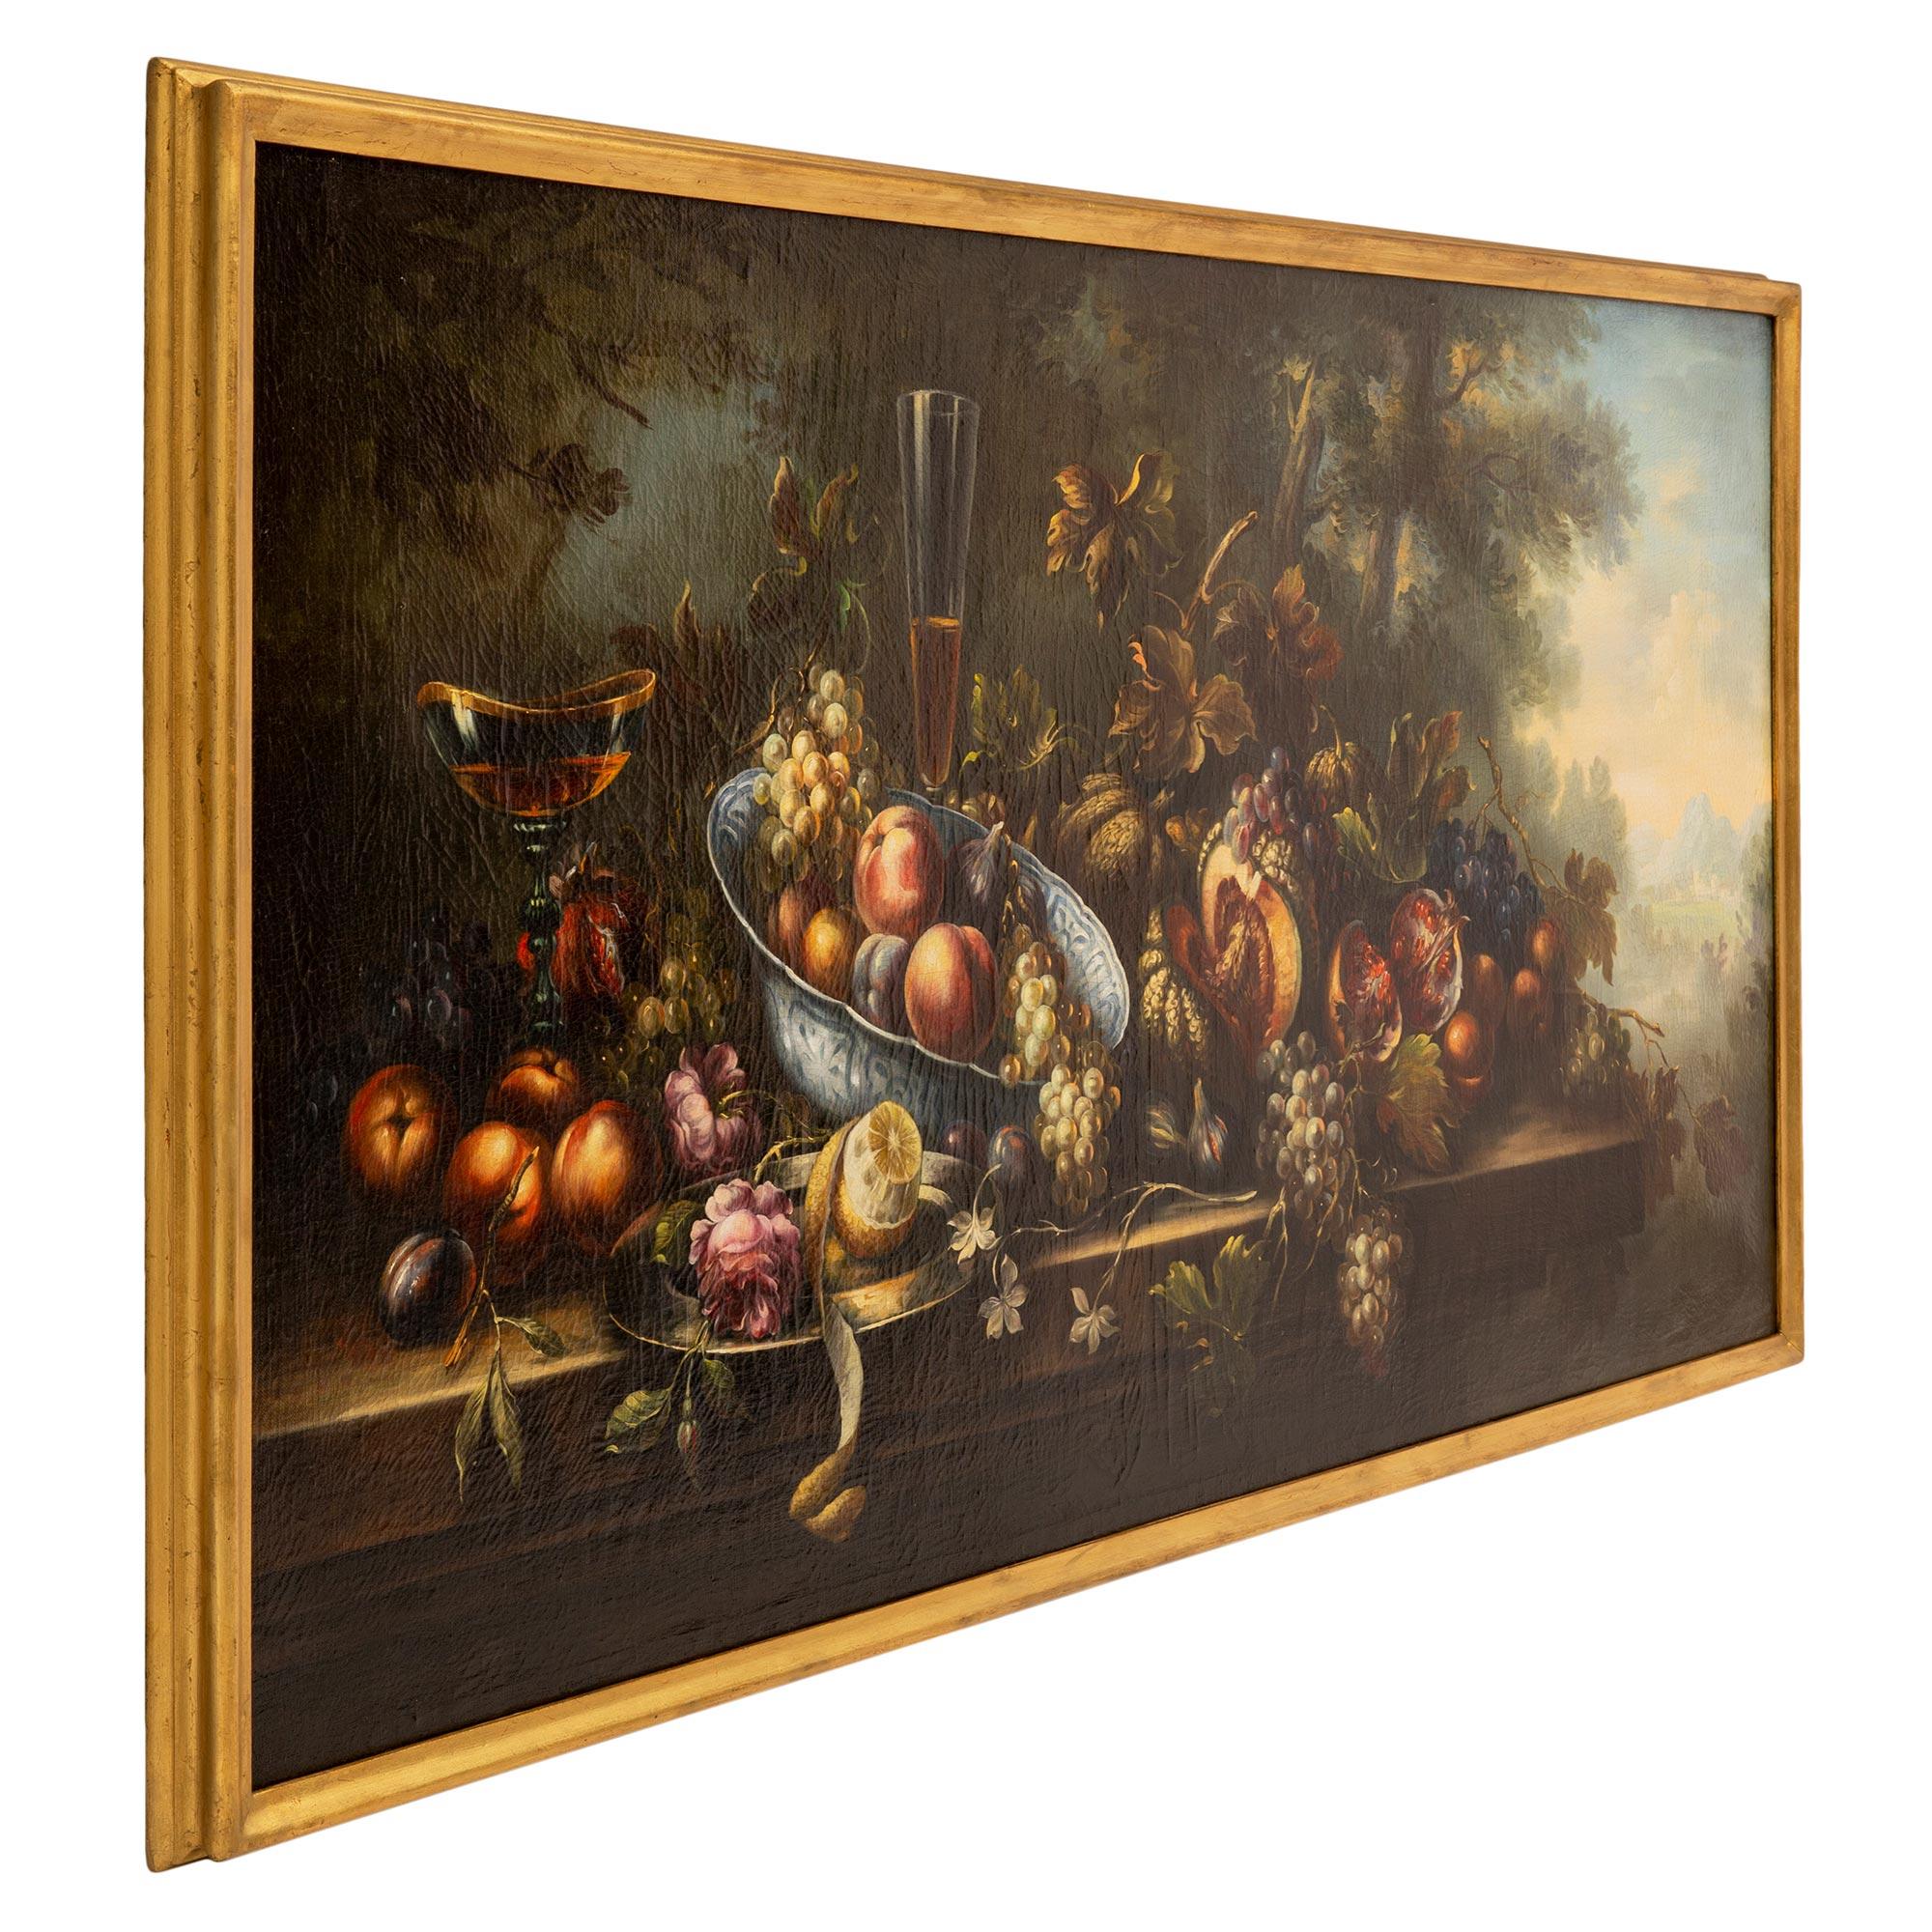 An exquisite Italian early 18th century still life oil on canvas Roman painting in its original giltwood frame. The striking painting depicts an opulent array of beautiful fruit on a banquet table in the Italian countryside. The fruits display